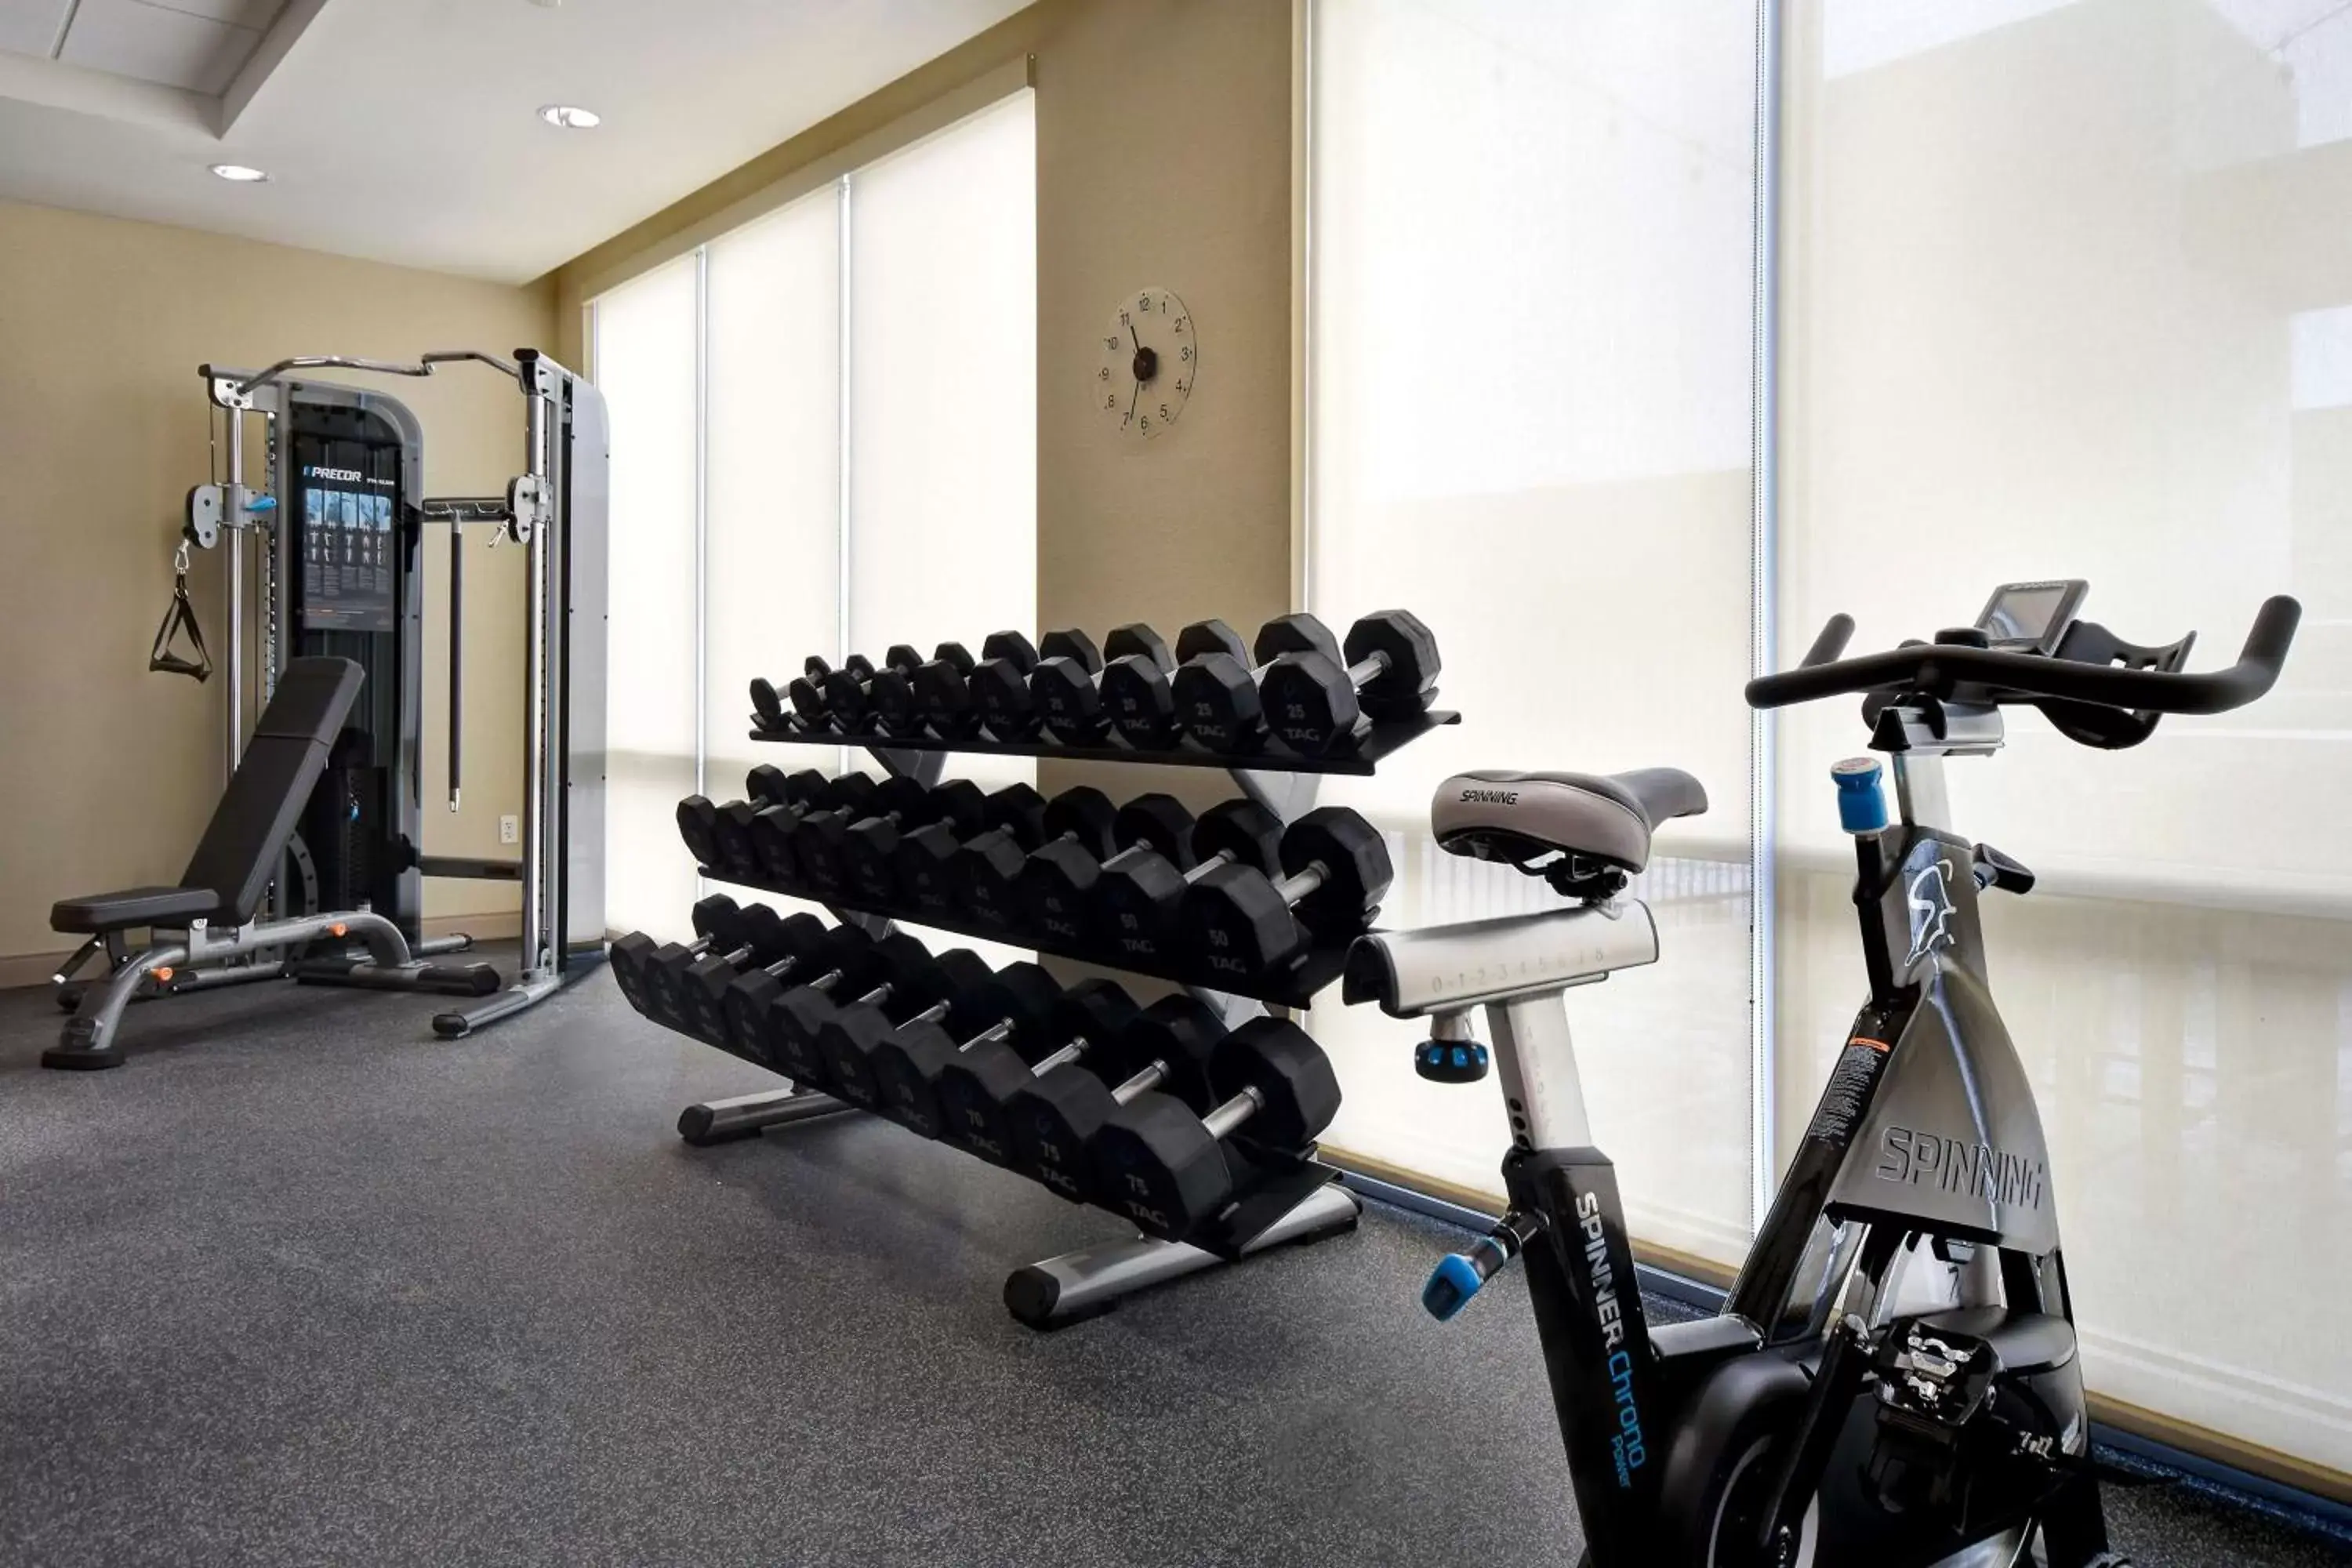 Fitness centre/facilities, Fitness Center/Facilities in Home2 Suites Wichita Downtown Delano, Ks